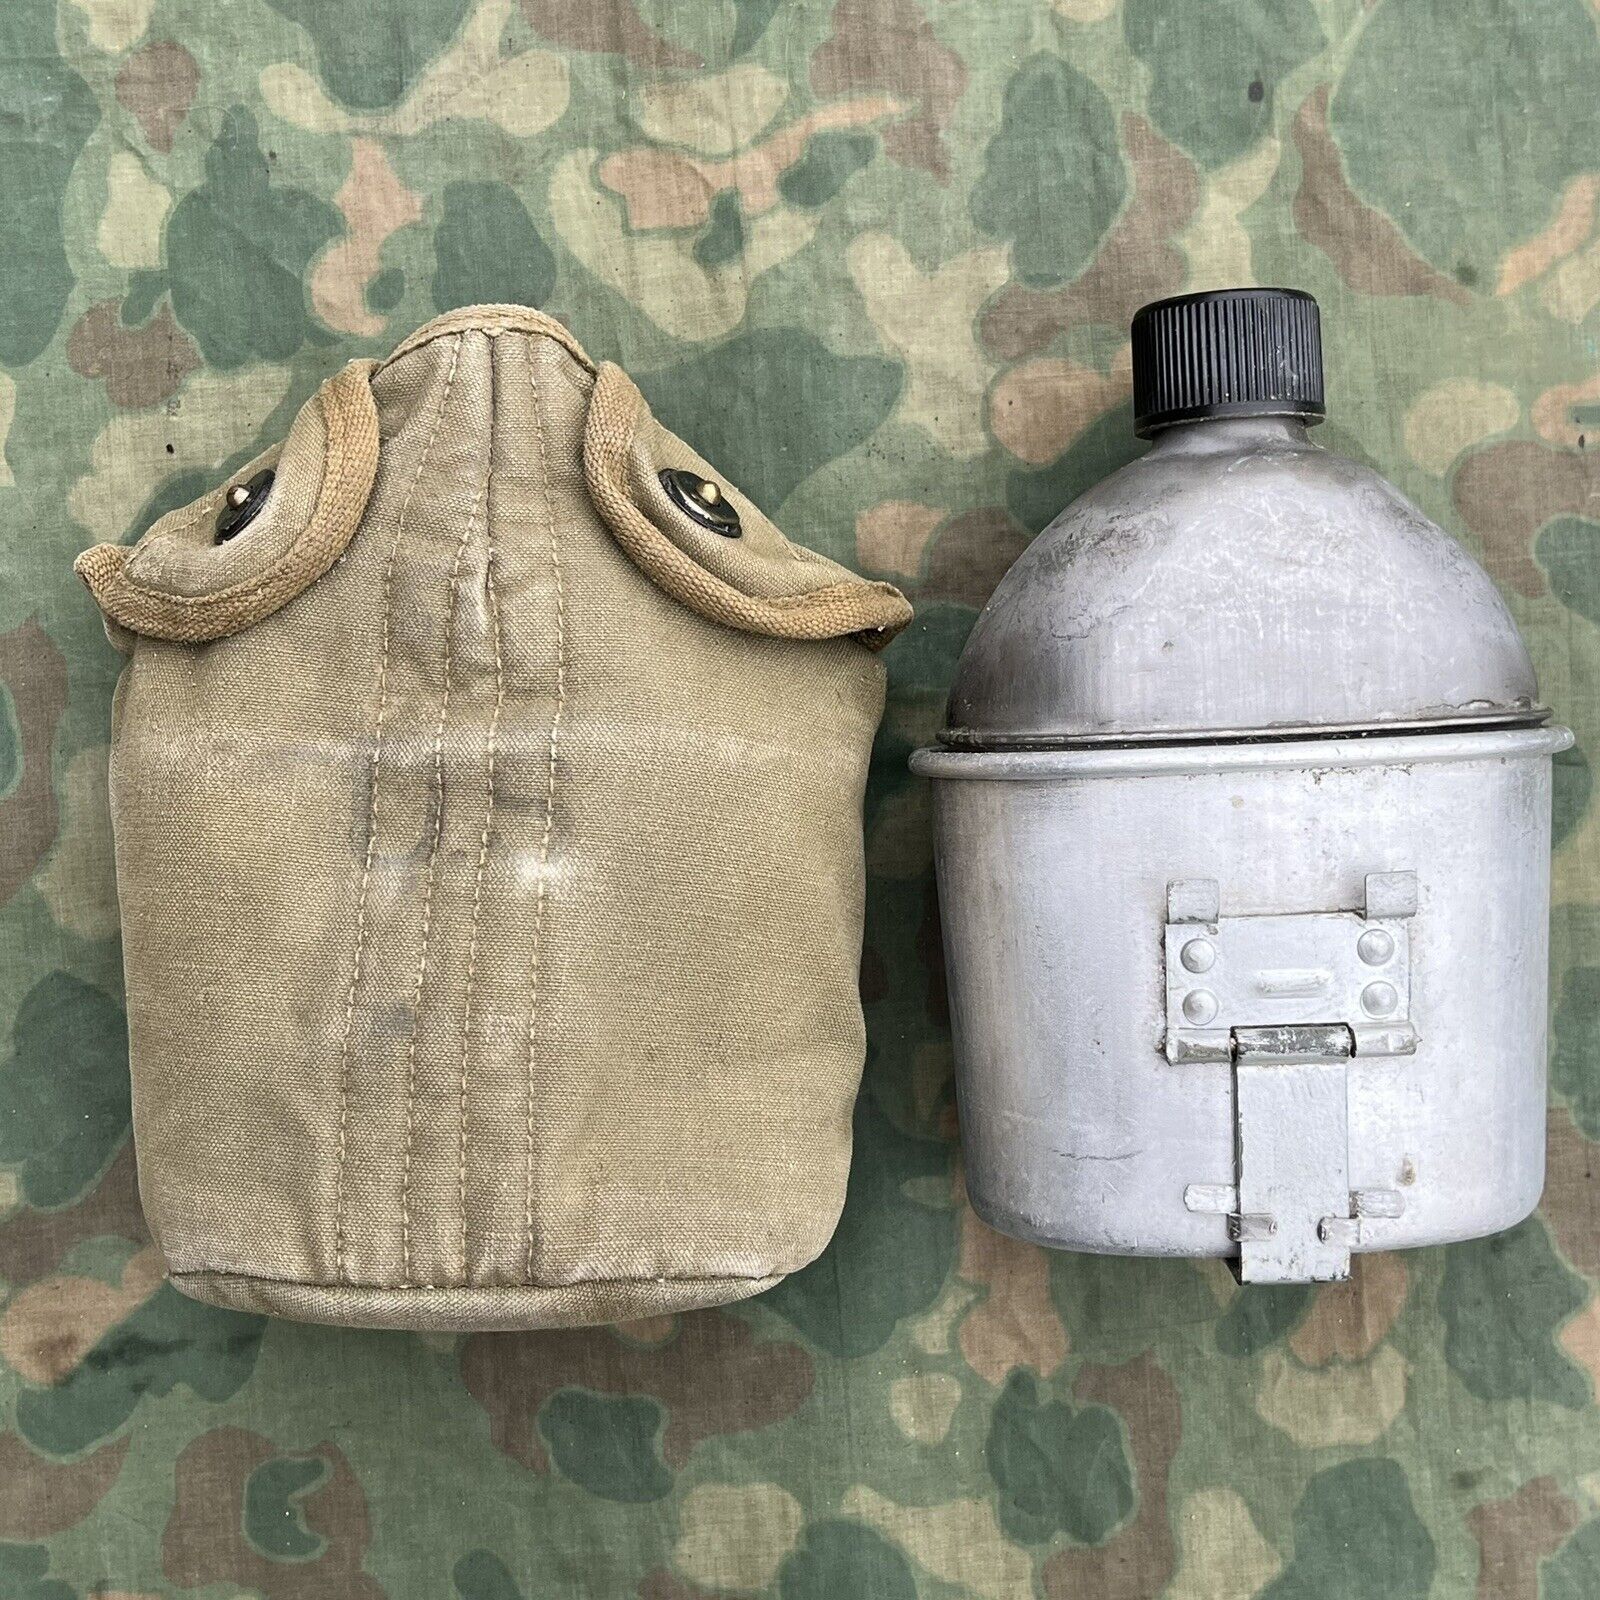 WWII US Army British Made Canteen Cover With Original 1918 Cup And 1944 Canteen